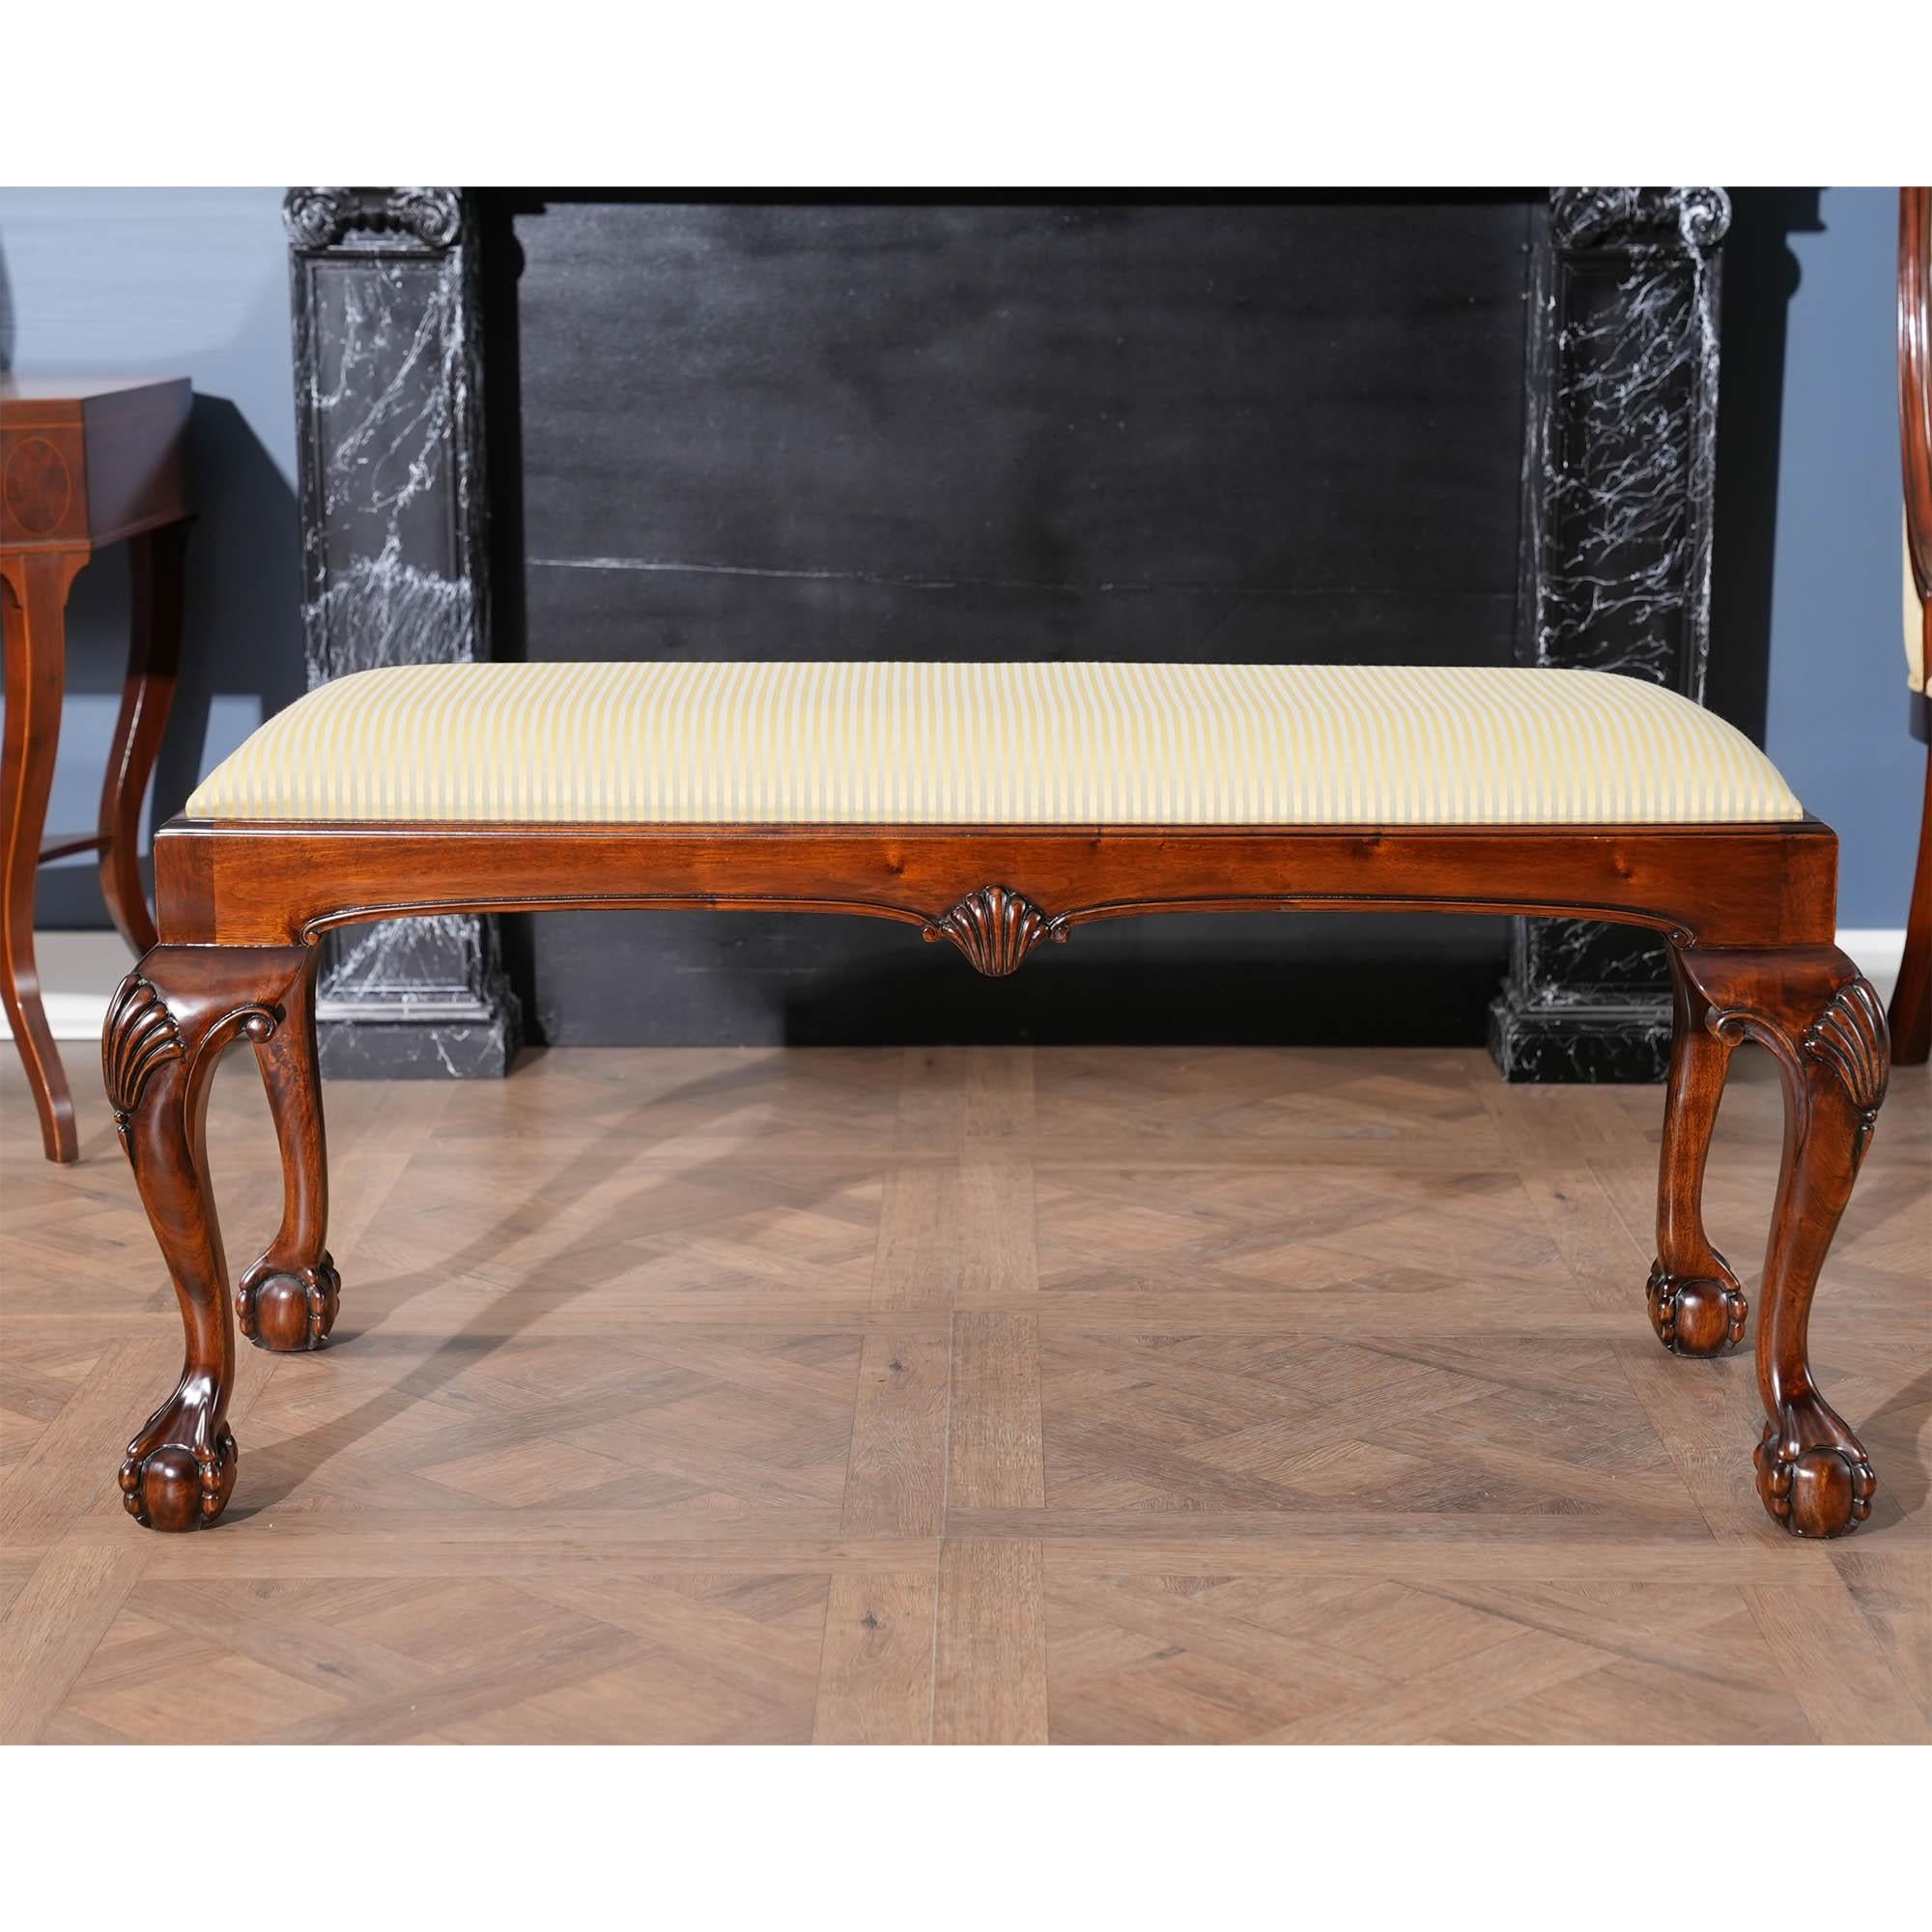 The Large Chippendale Bench is a high quality, solid mahogany large Chippendale style bench with upholstered drop in seat, shell carved knees on cabriole legs resting on ball and claw feet. Beautifully finished with neutral upholstery and ready to